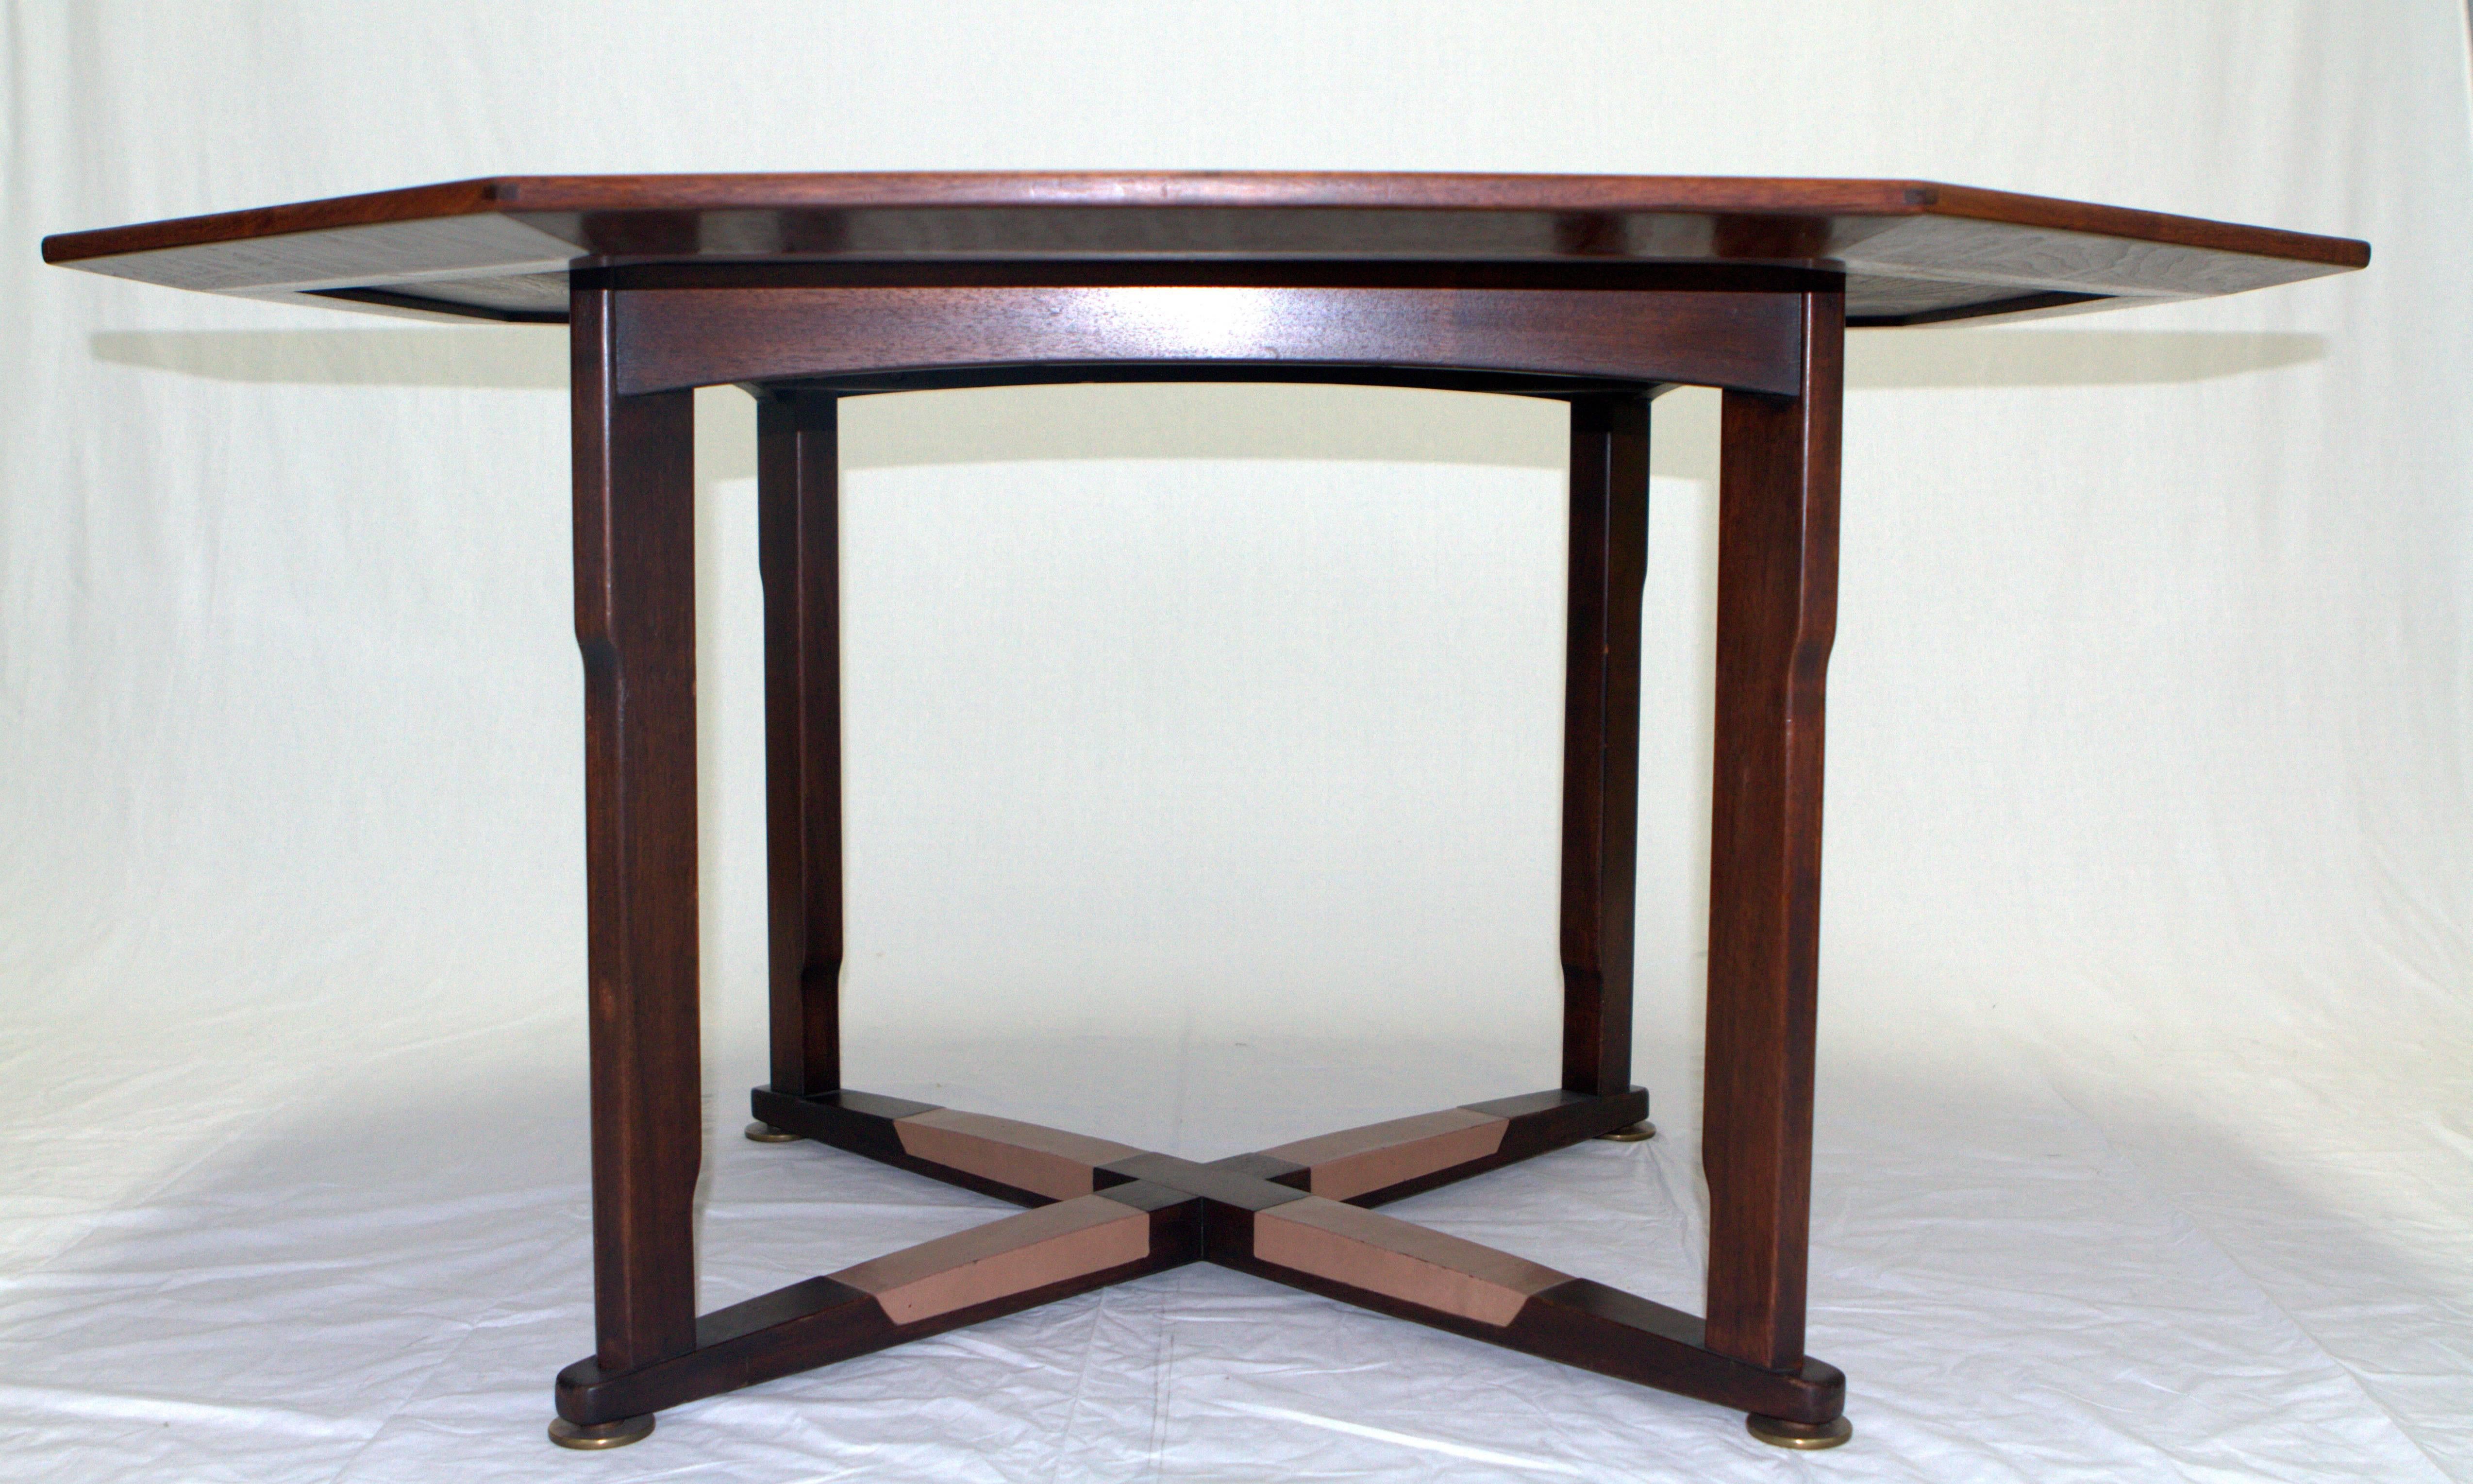 Amazing octagonal walnut game table with an inlay rosewood star by Edward Wormley for Dunbar Janus Collection. Walnut frame reminiscent of Arts and Crafts with original inset leather footrests finished with brass leveler feet. Superior construction